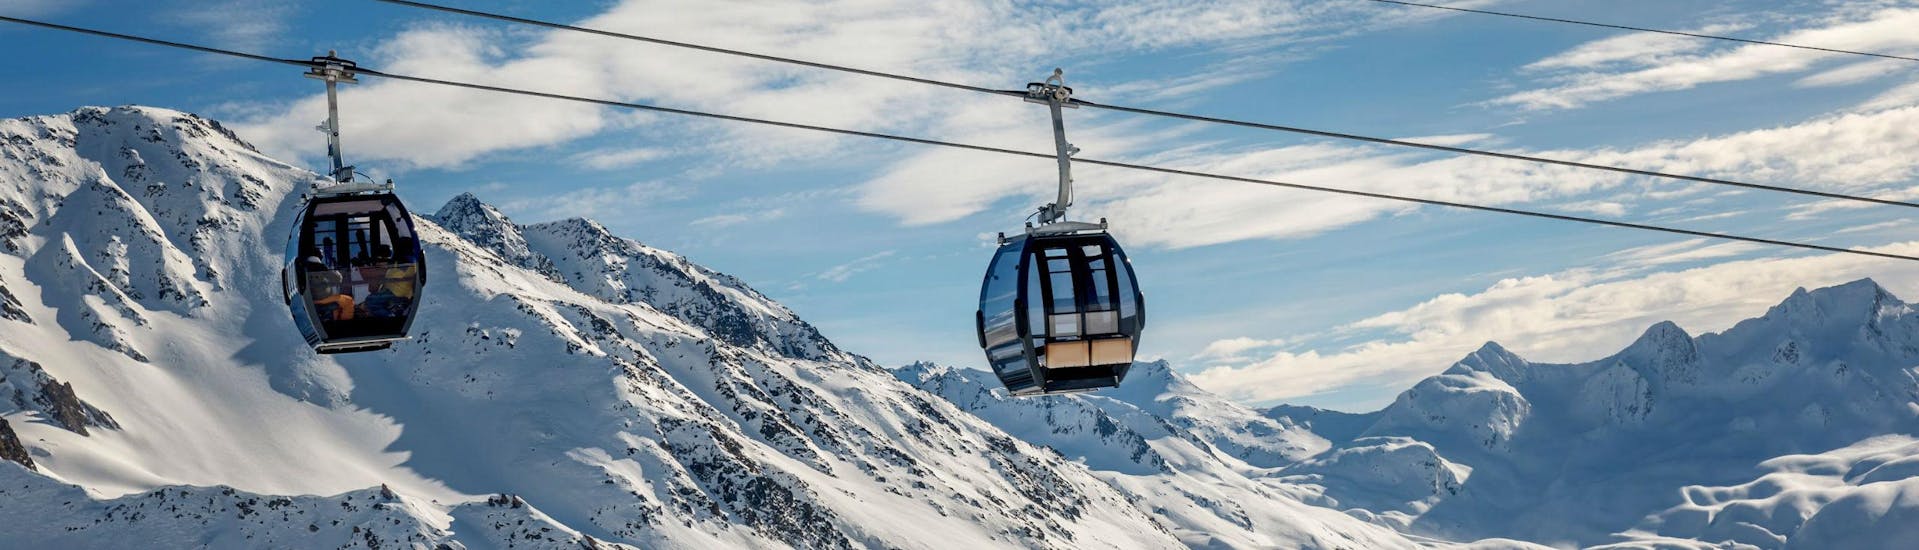 A view of the cable car carrying skiers up to the top of the mountain in the ski resort of Andermatt, where local ski schools offer a selection of ski lessons.